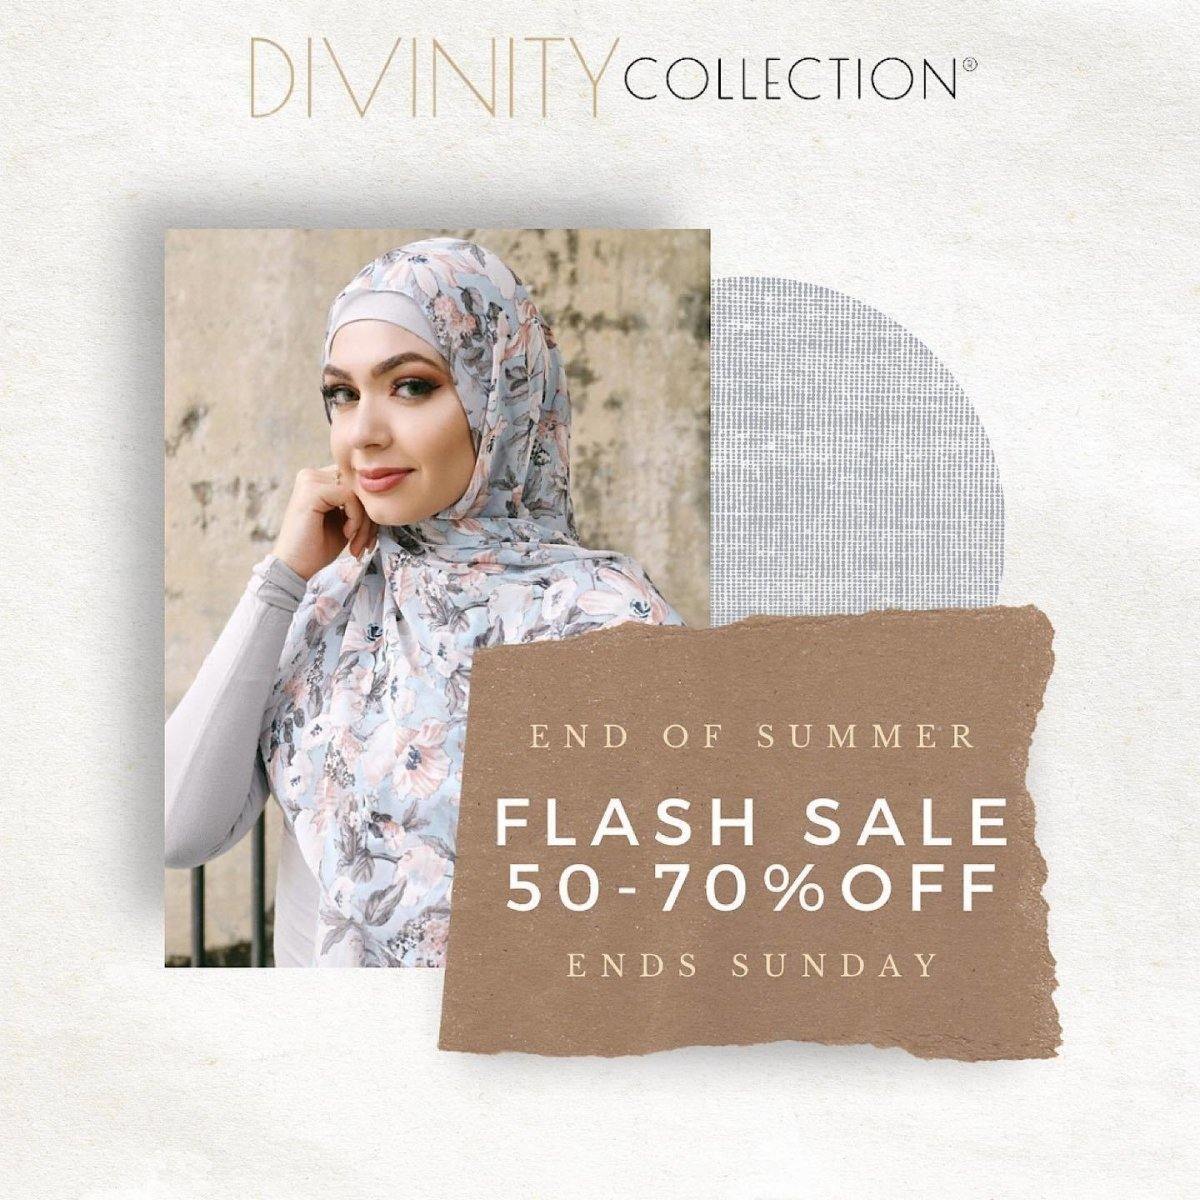 Ends Tonight.

https://www.divinitycollection.com.au/collections/flash-sale... - Divinity Collection